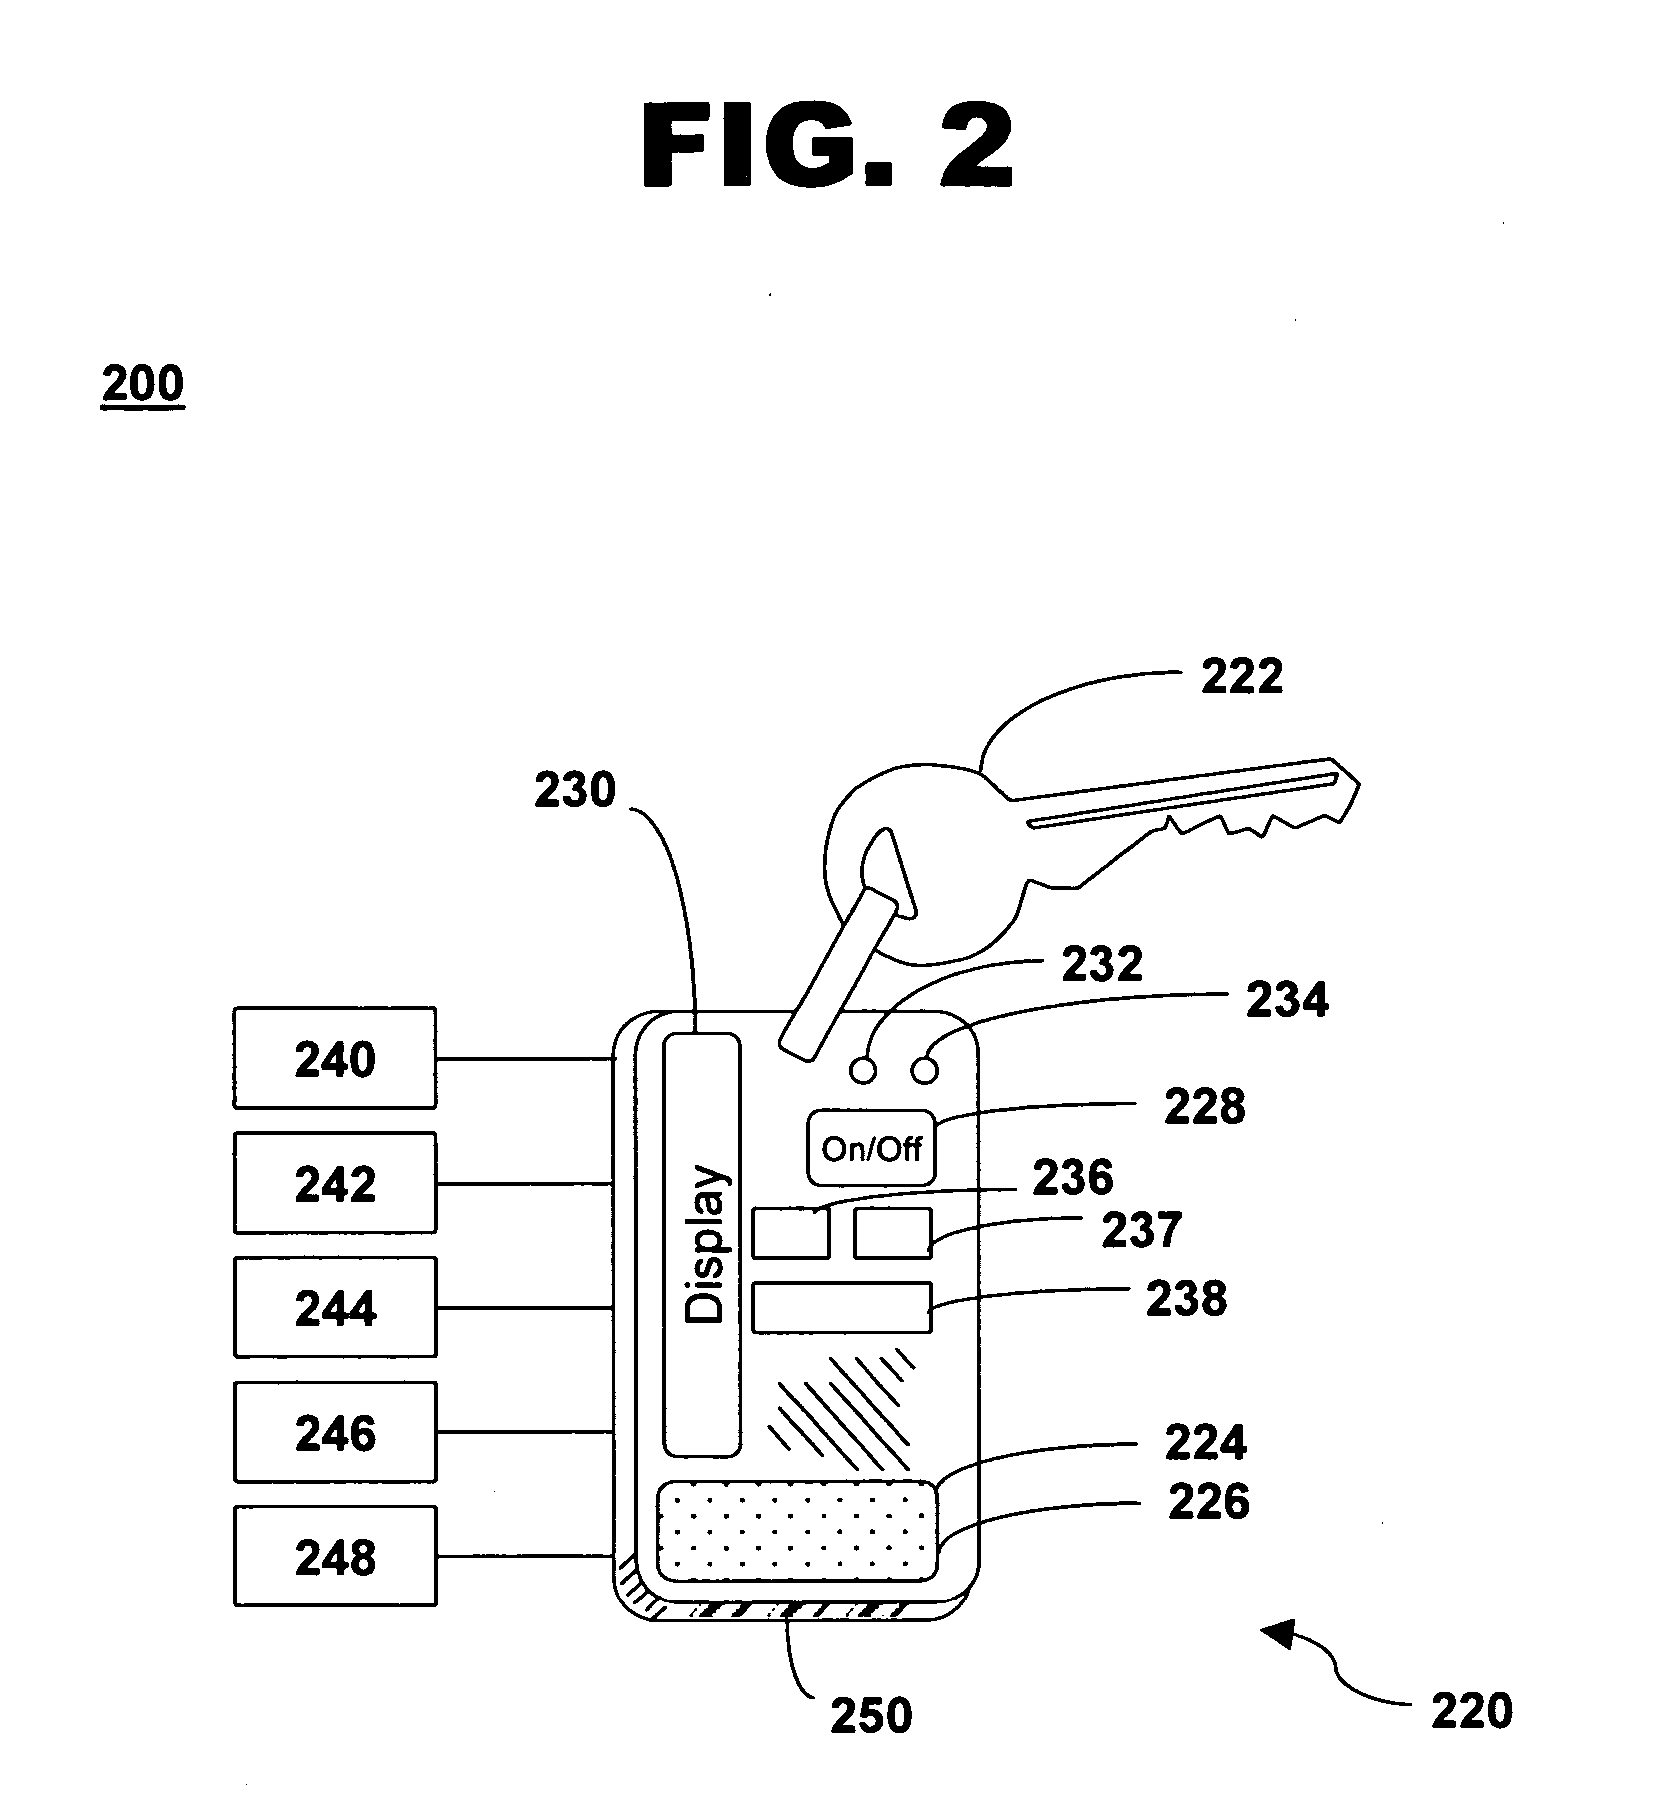 Method and system for status indication on a key fob